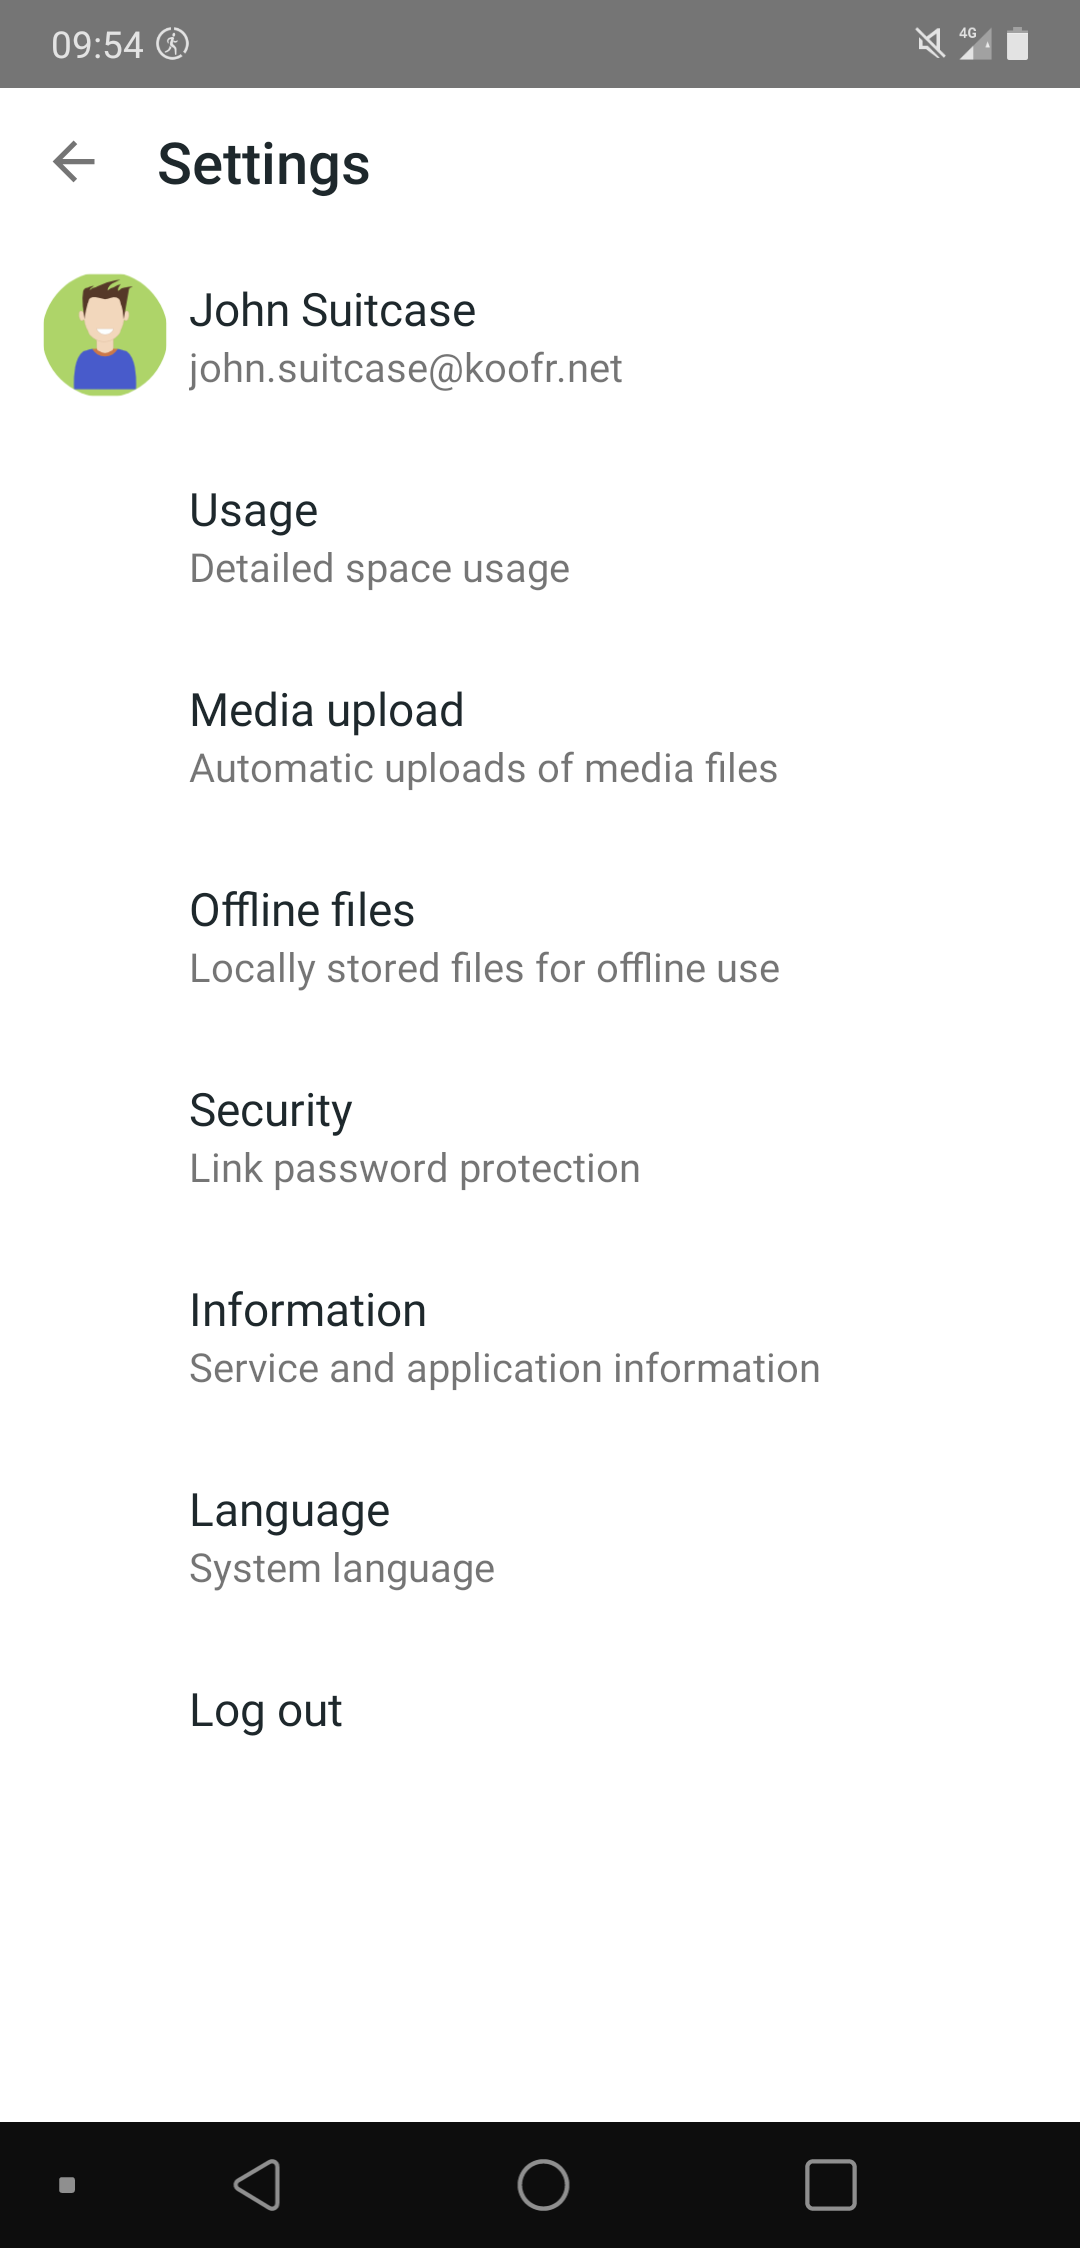 The Settings menu in the Koofr mobile app for Android.